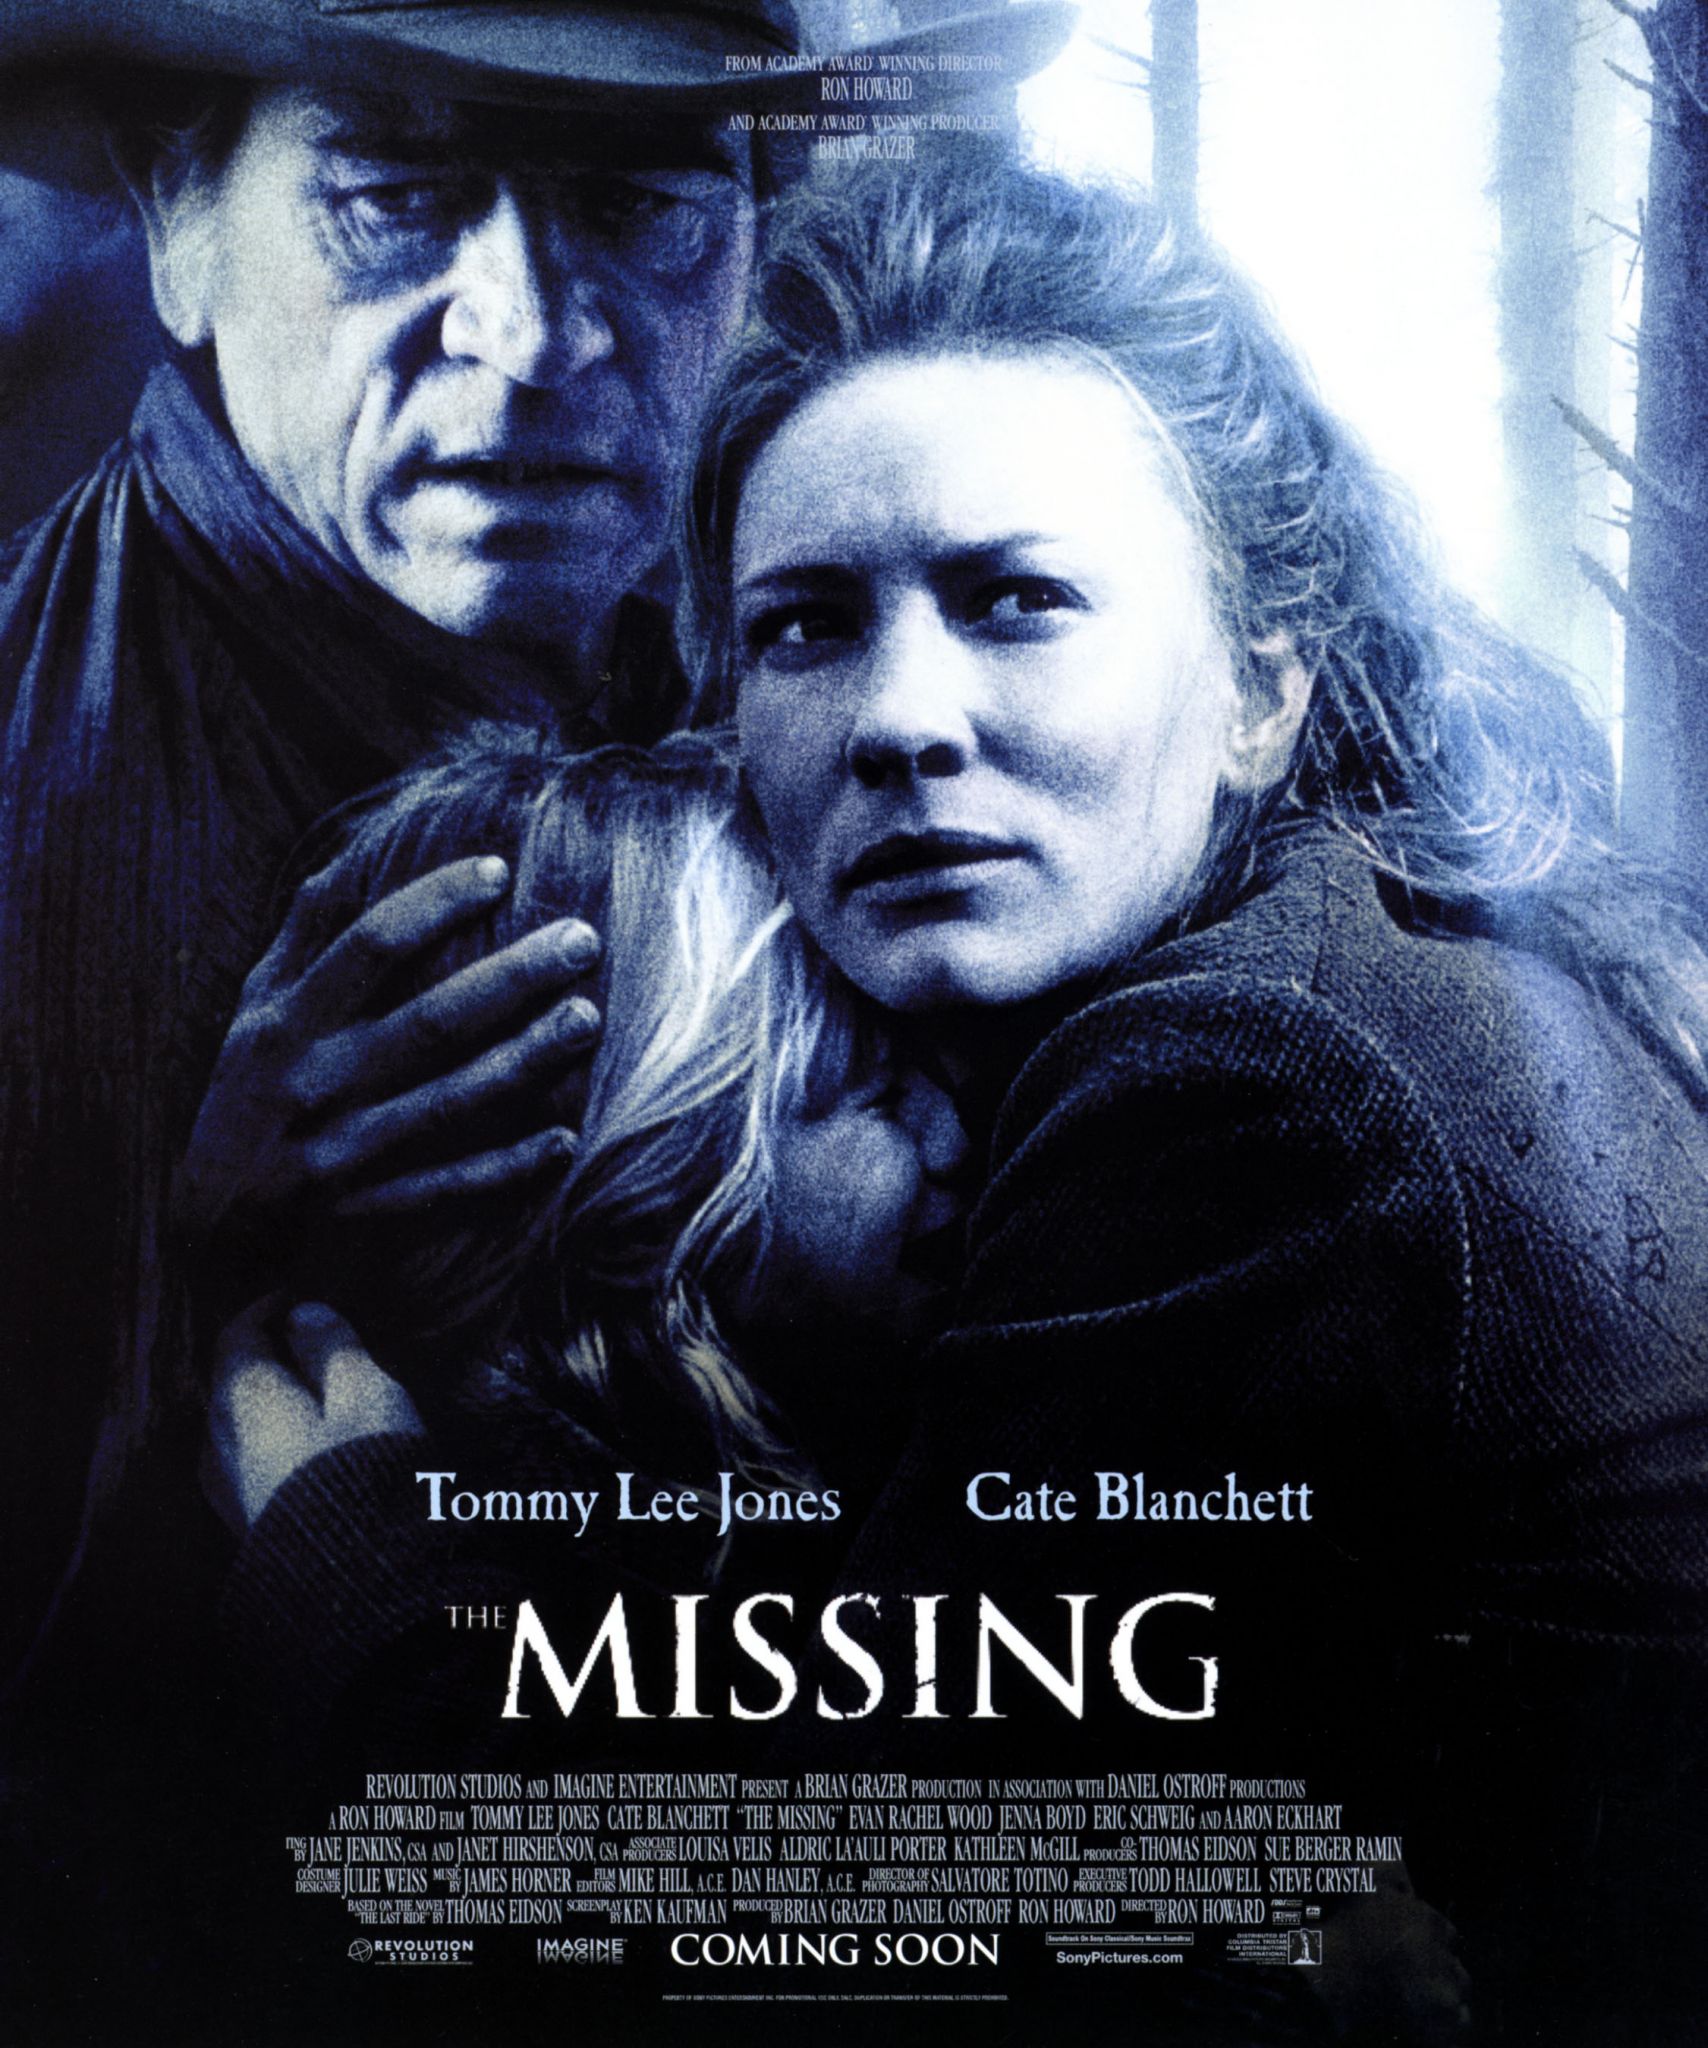 TheMissing-Posters_008.jpg